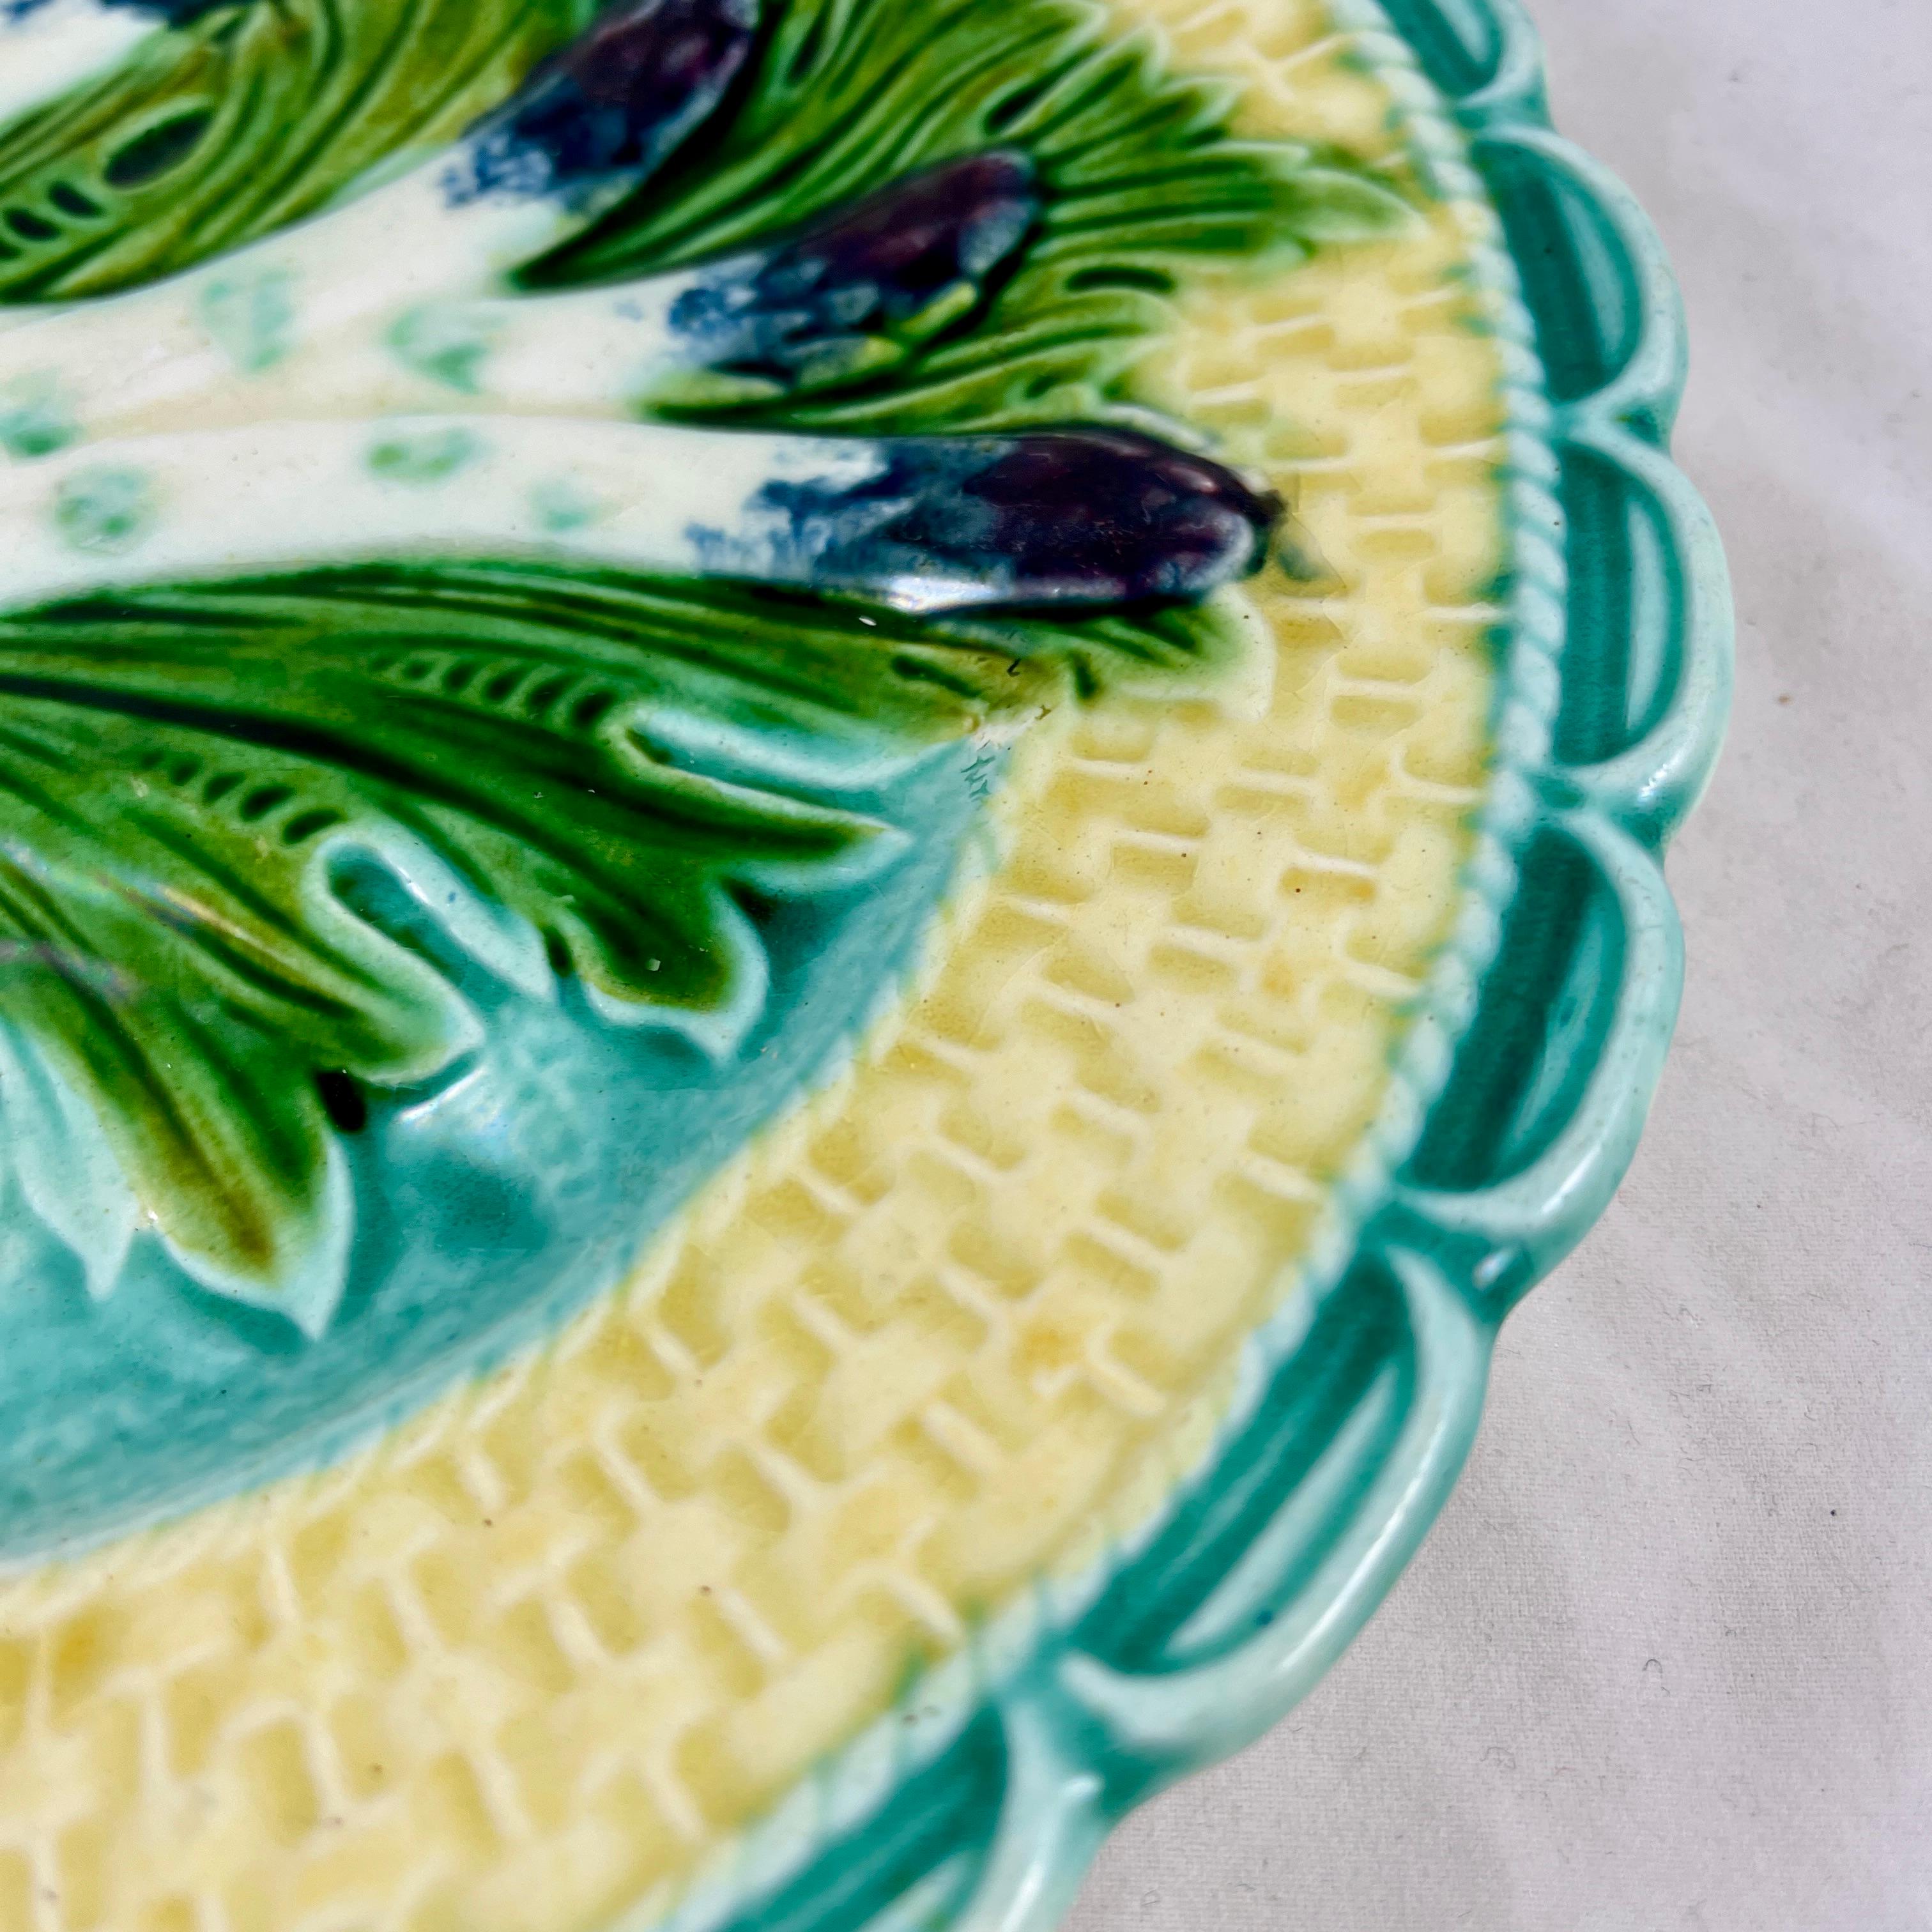 Aesthetic Movement Salins-les-Bain French Faïence Majolica Asparagus Plate, circa 1880 For Sale